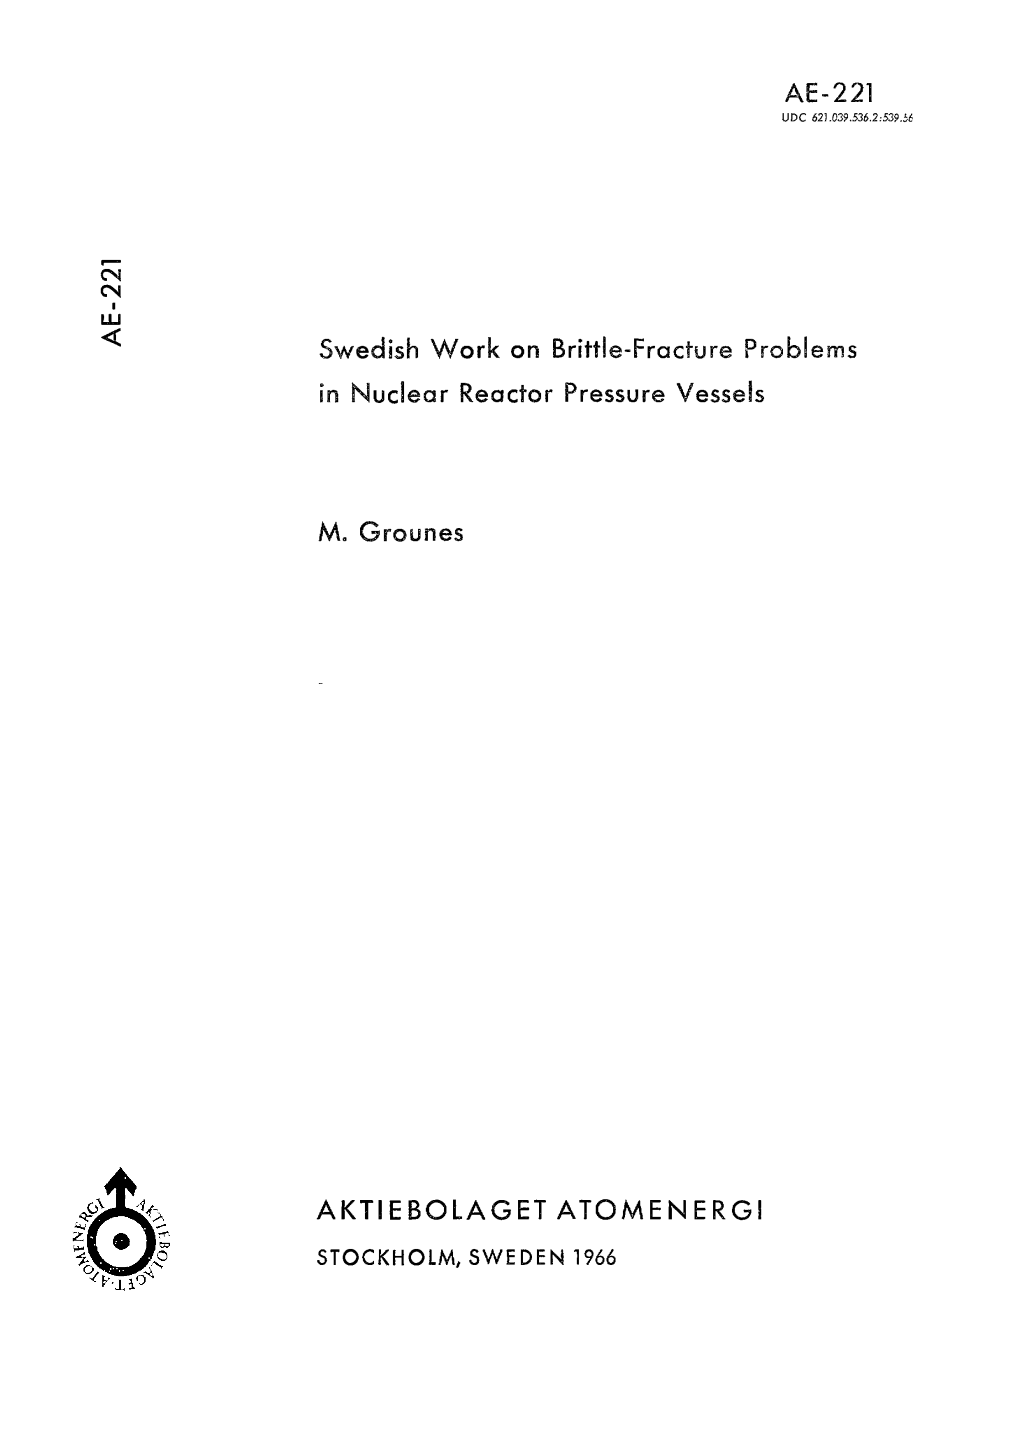 Swedish Work on Brittle-Fracture Problems in Nuclear Reactor Pressure Vessels